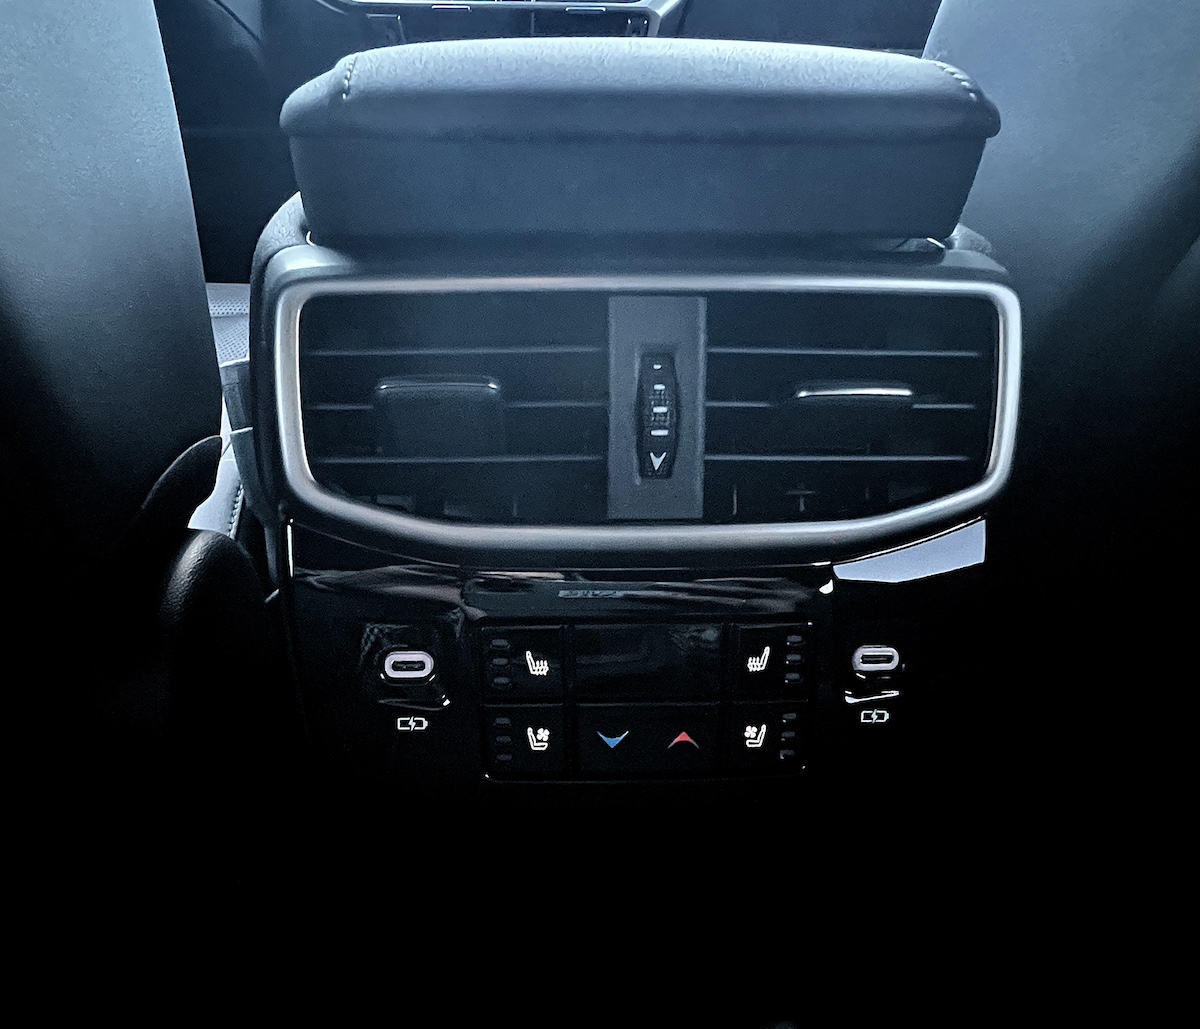 Rear Controls For Back Seat Passengers Include Heated Seats